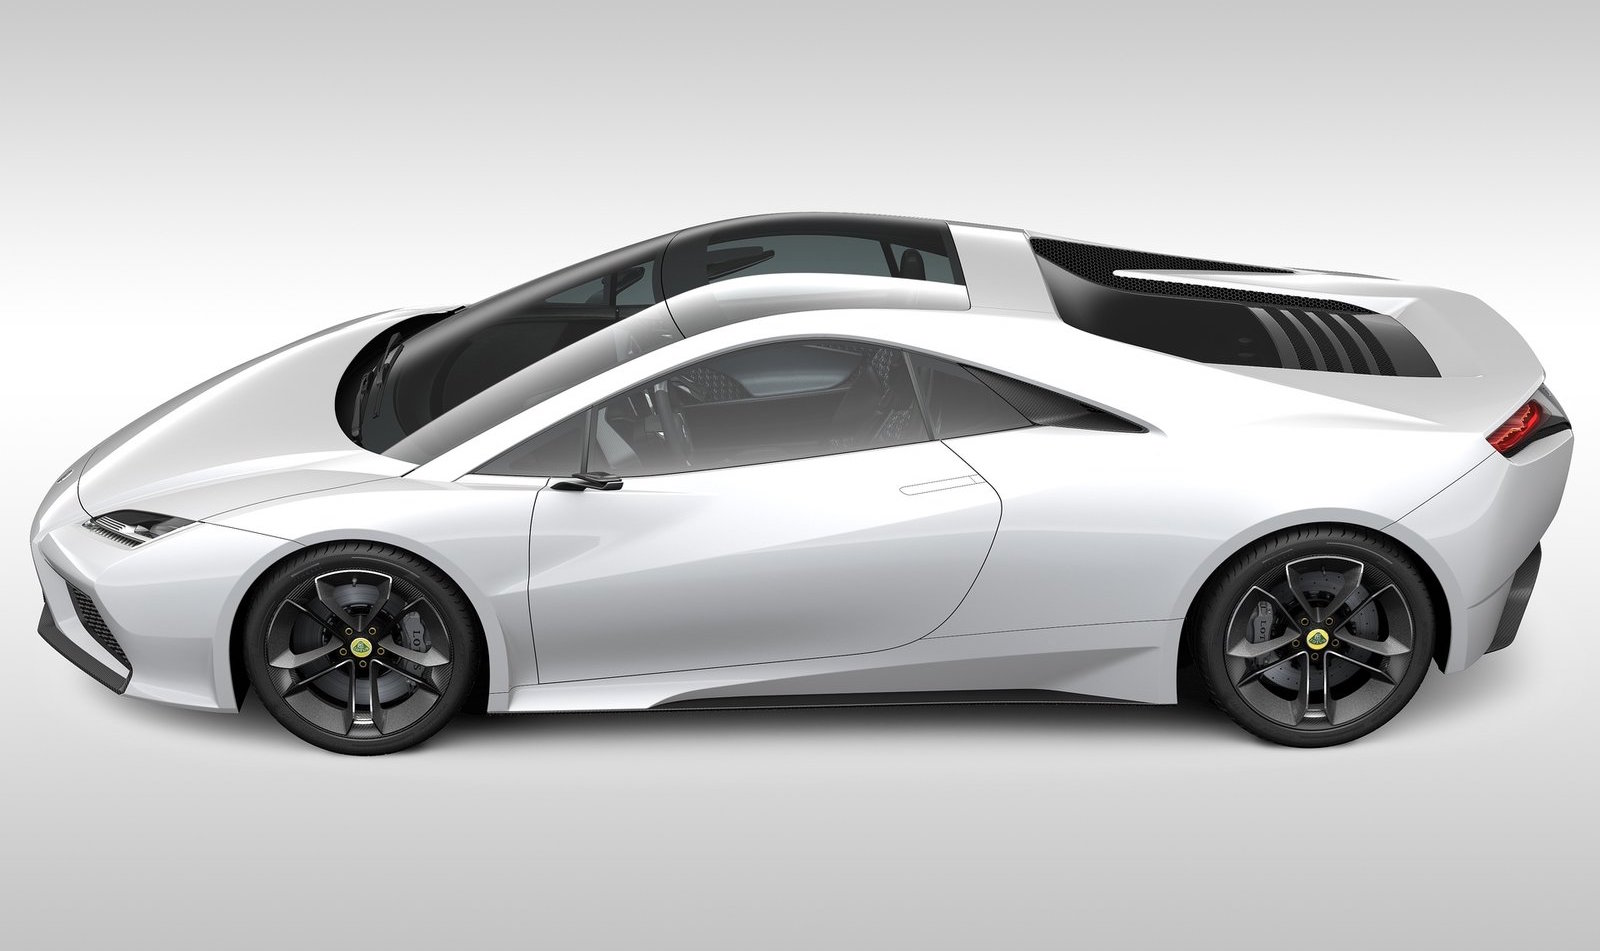 New Lotus Esprit to debut V6 hybrid, with Toyota 3.5L – report